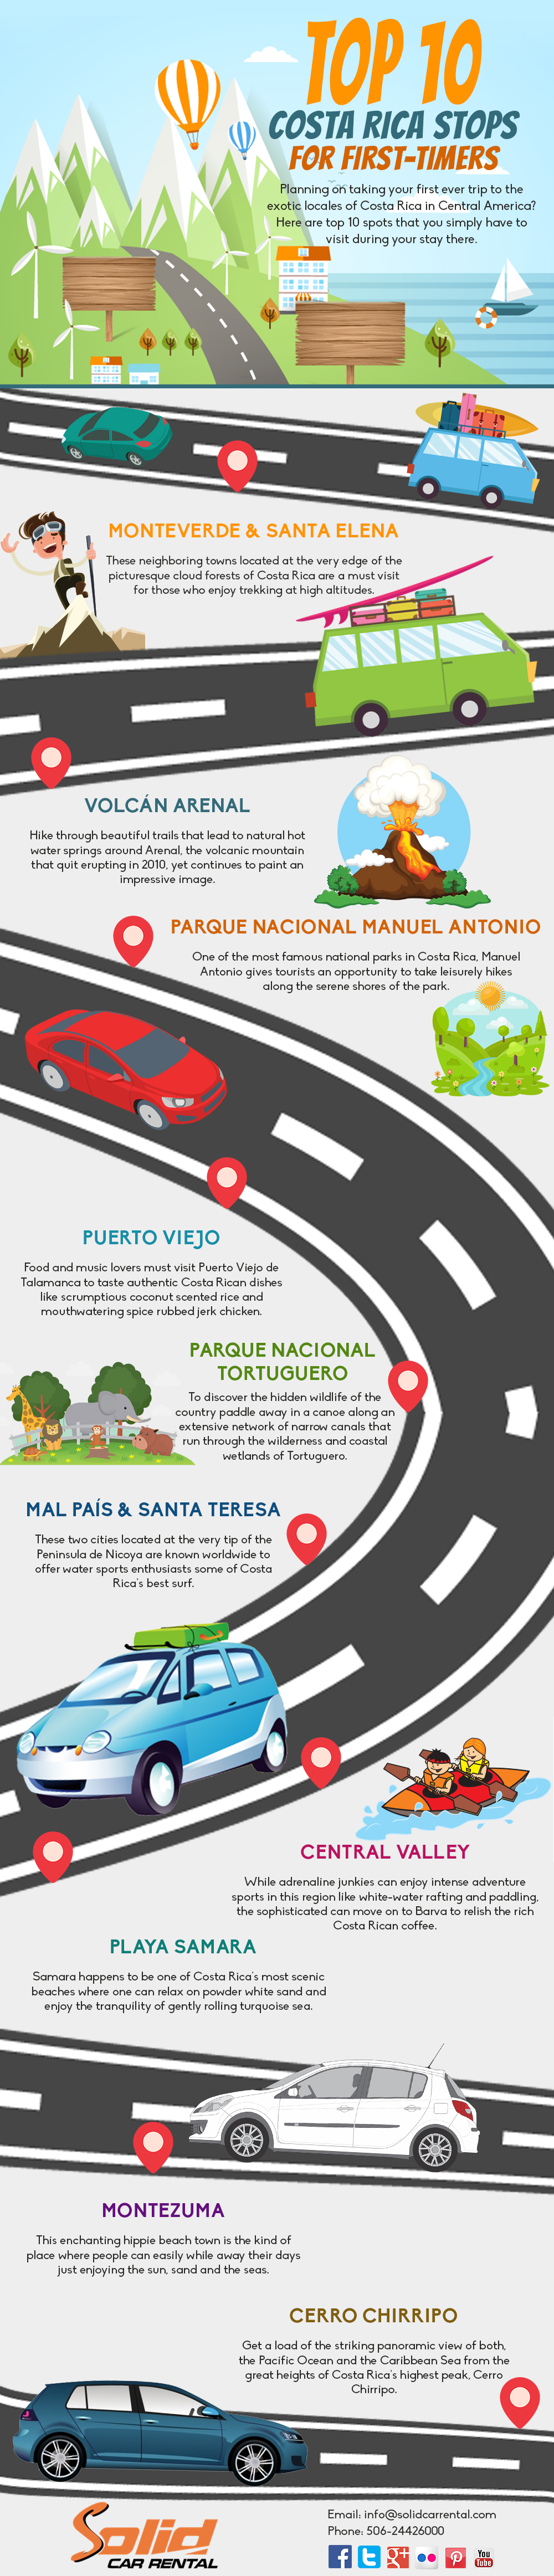 solidcarrental-infographic-new123